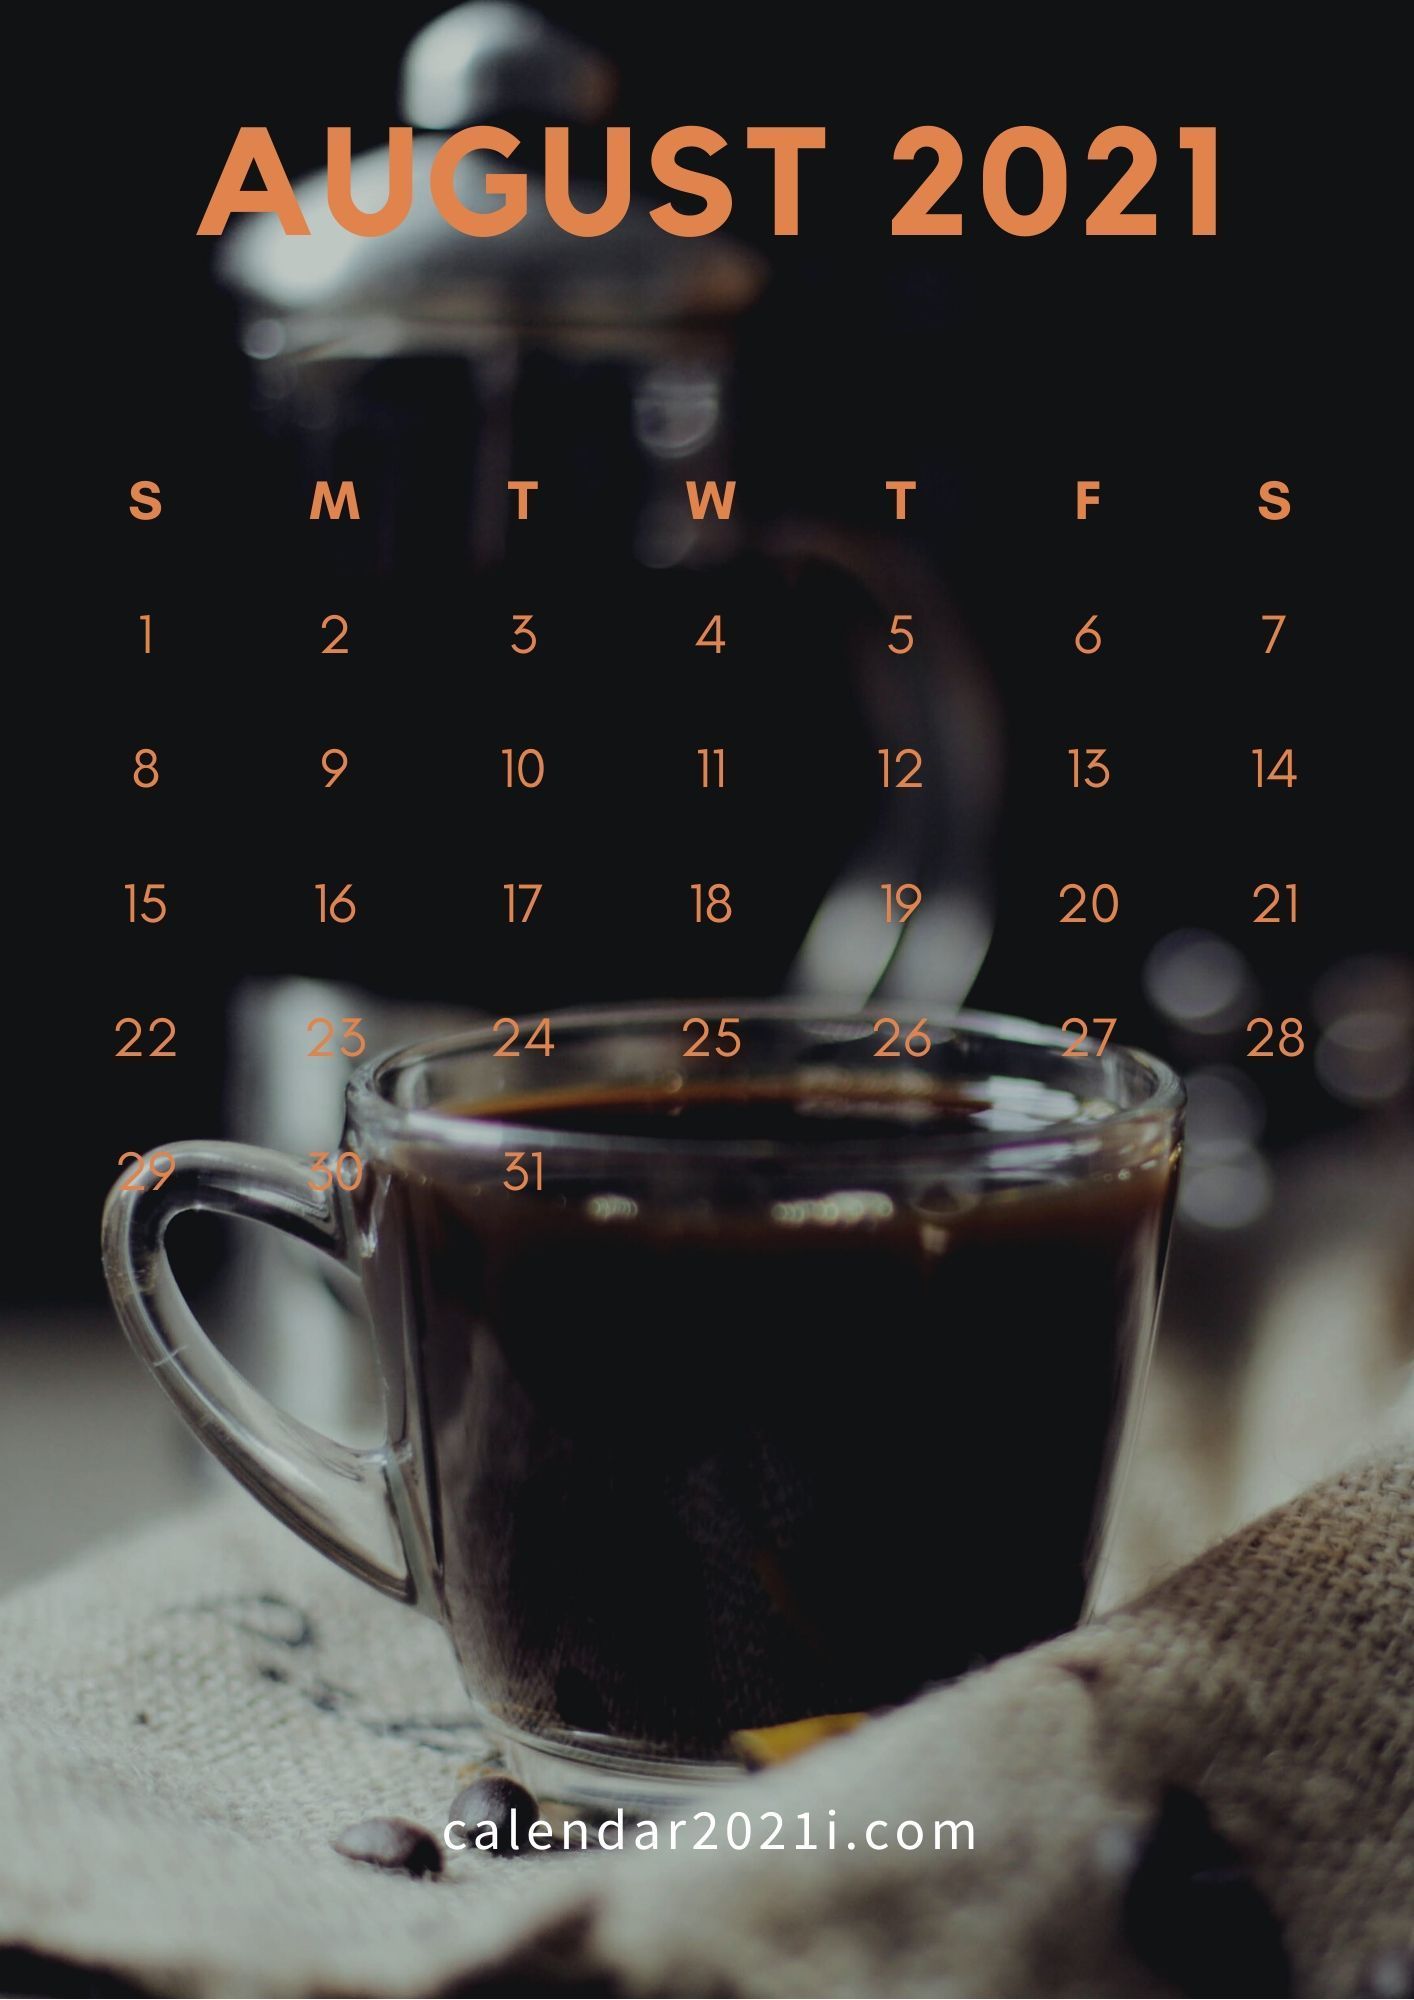 August 2021 Calendar iPhone Wallpapers in high definition in 2020